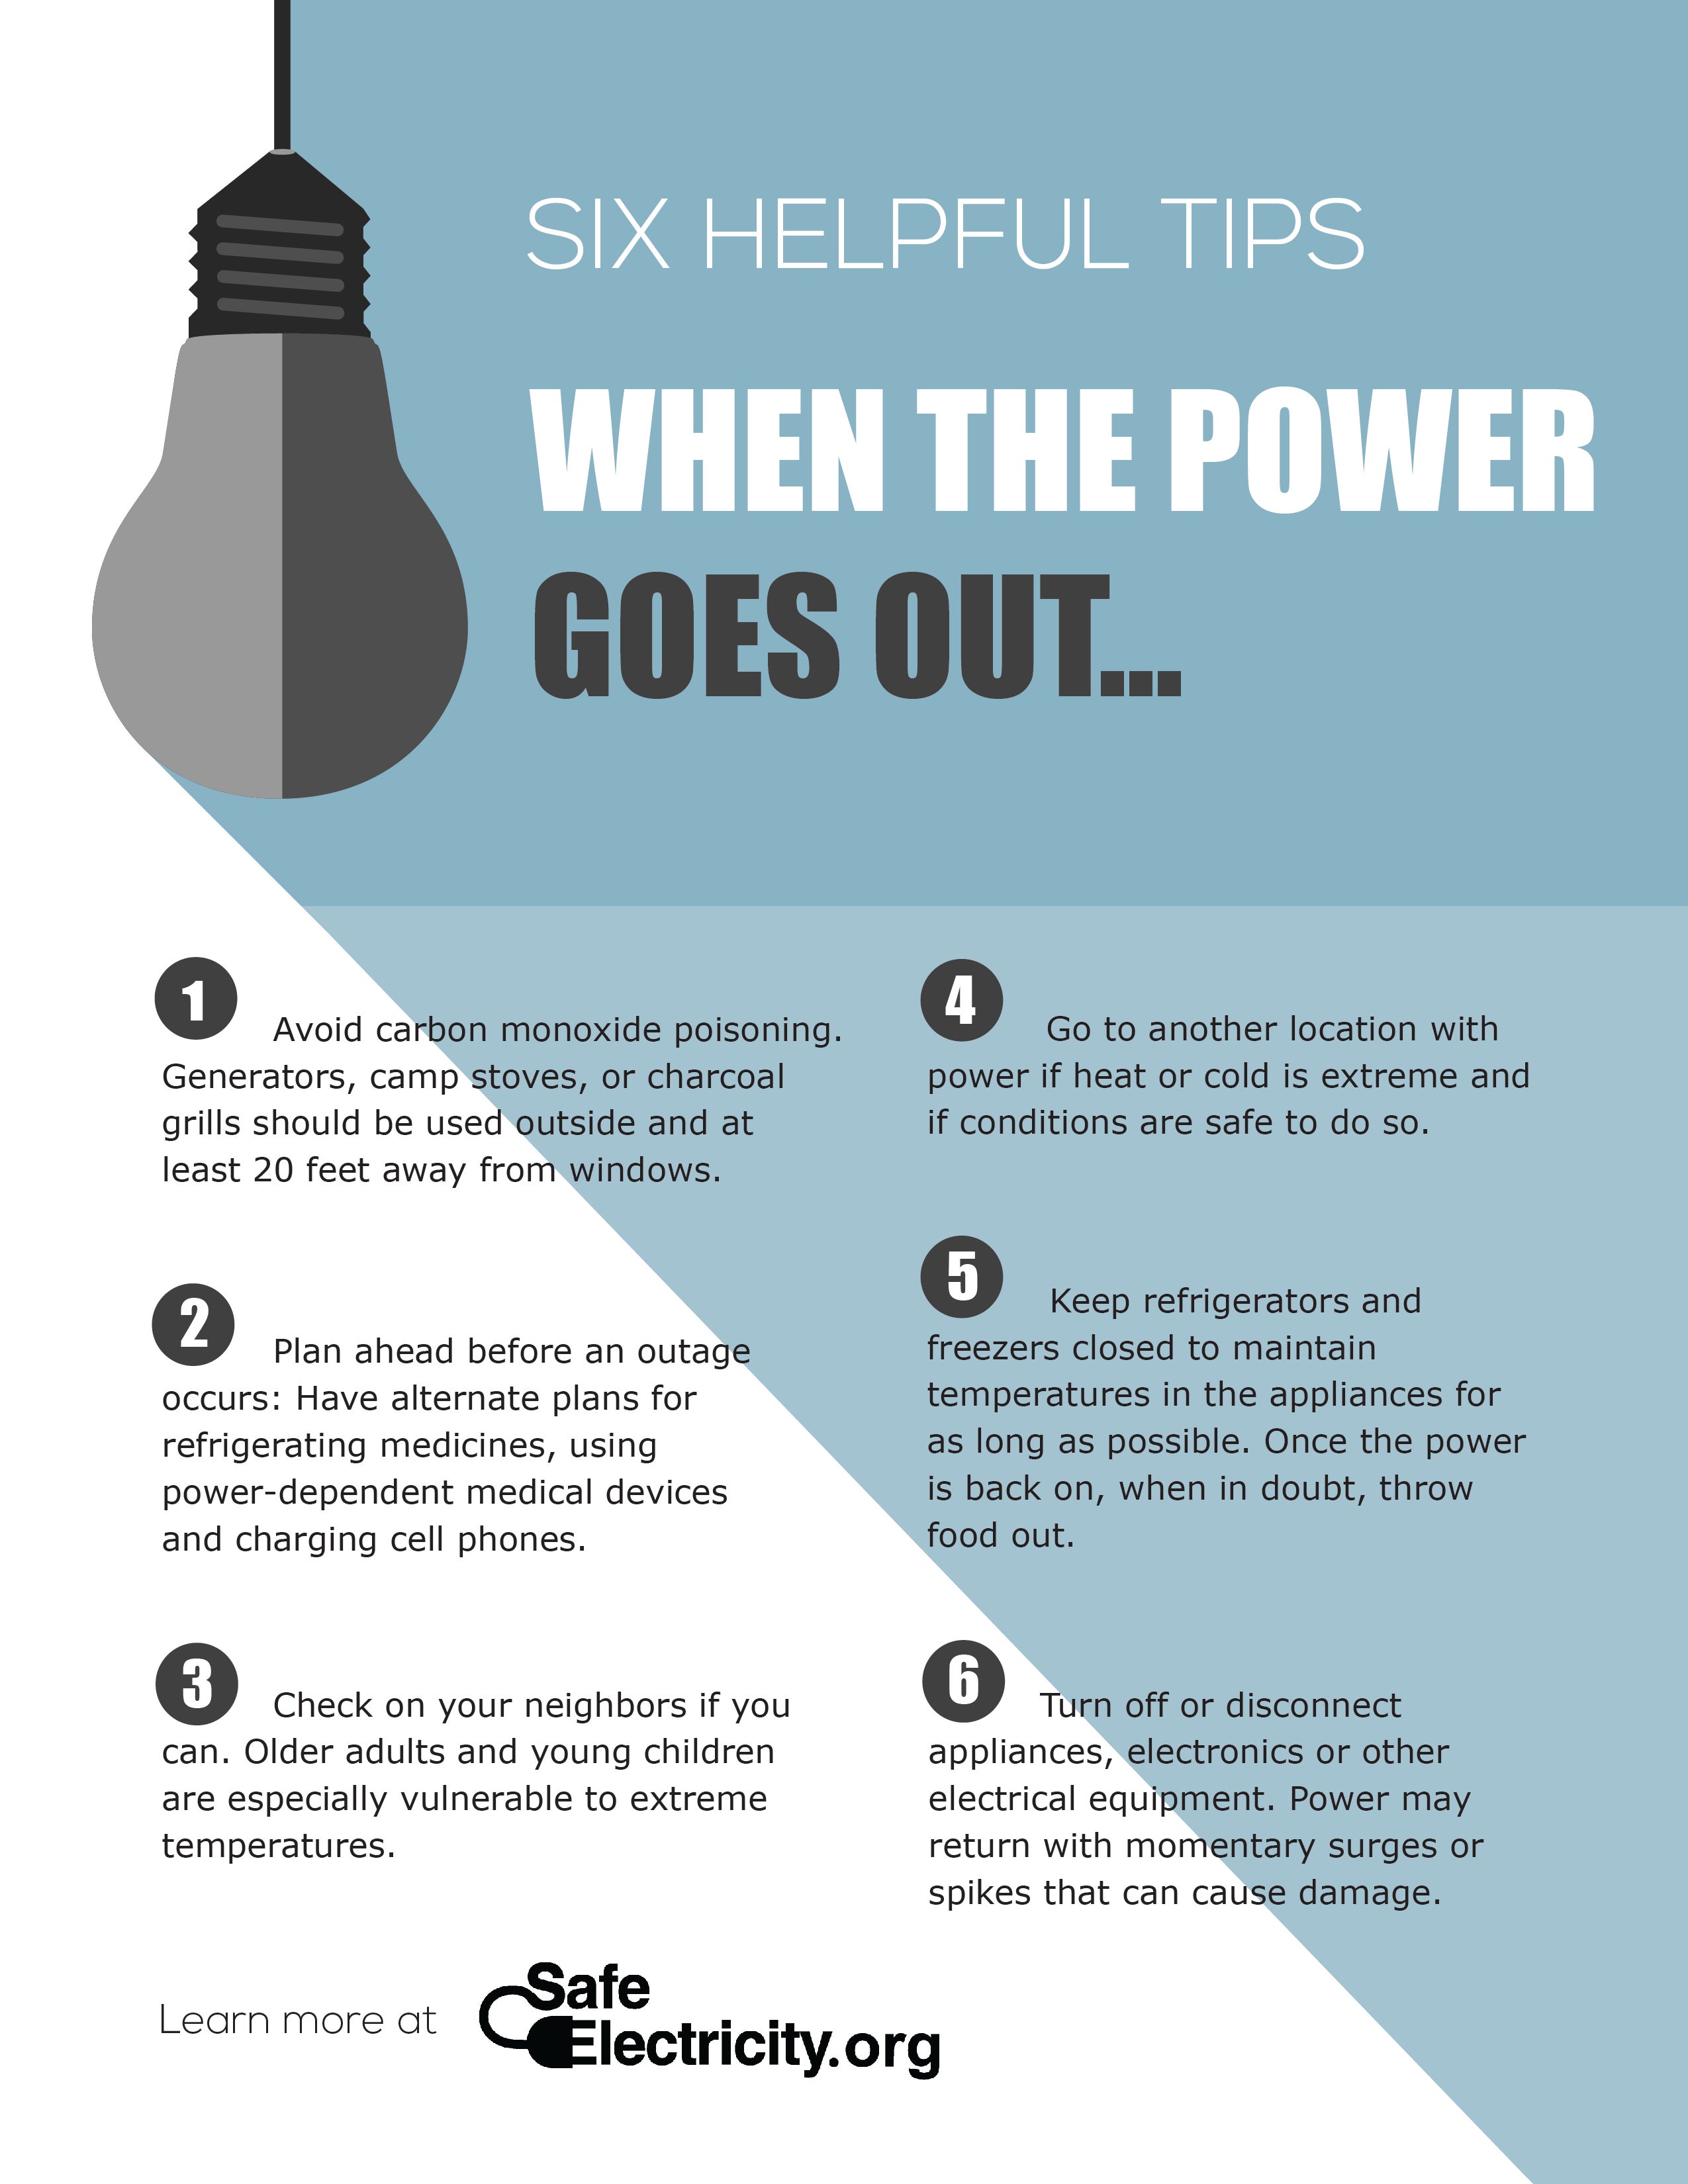 6 Tips for When the Power Goes Out